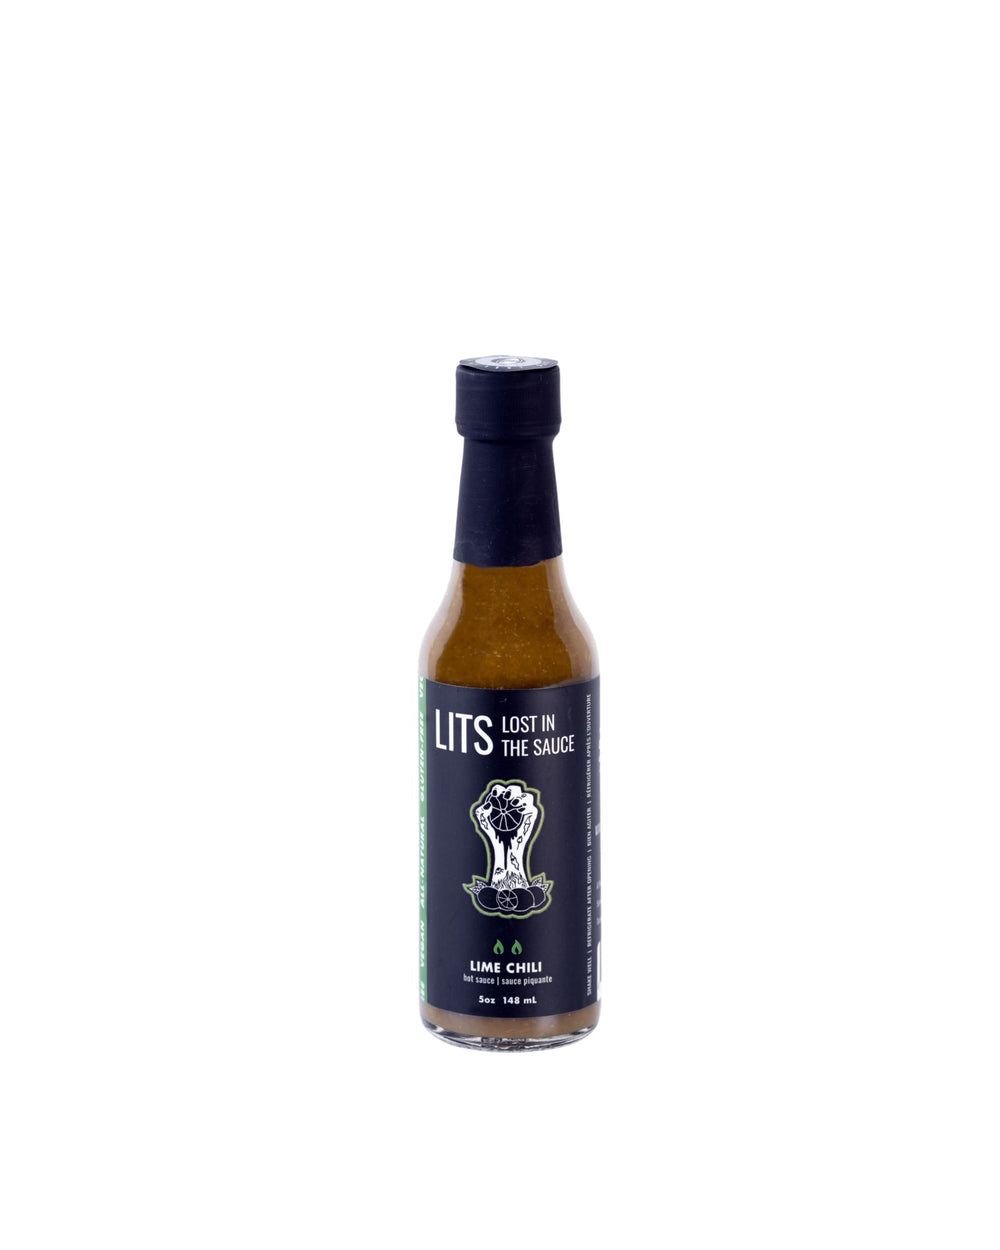 LITS Lime Chili - our take on a salsa verde, our Lime Chili blends citrusy flavours together with jalapenos to give you a fresh kick to your tacos seafood guac and more!